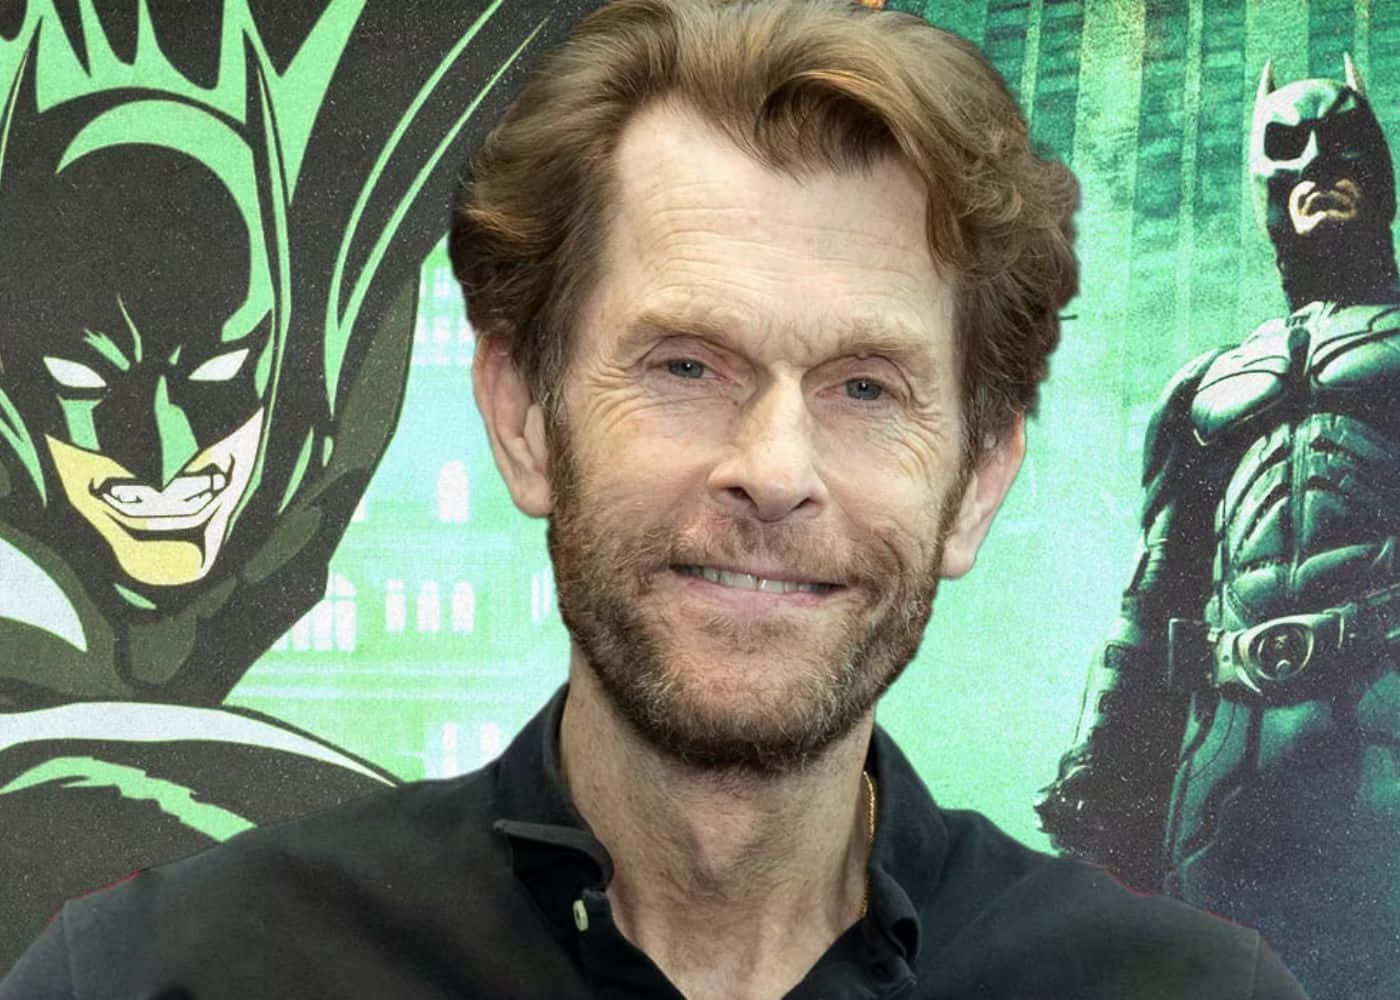 Kevin Conroy striking a pose at an event Wallpaper